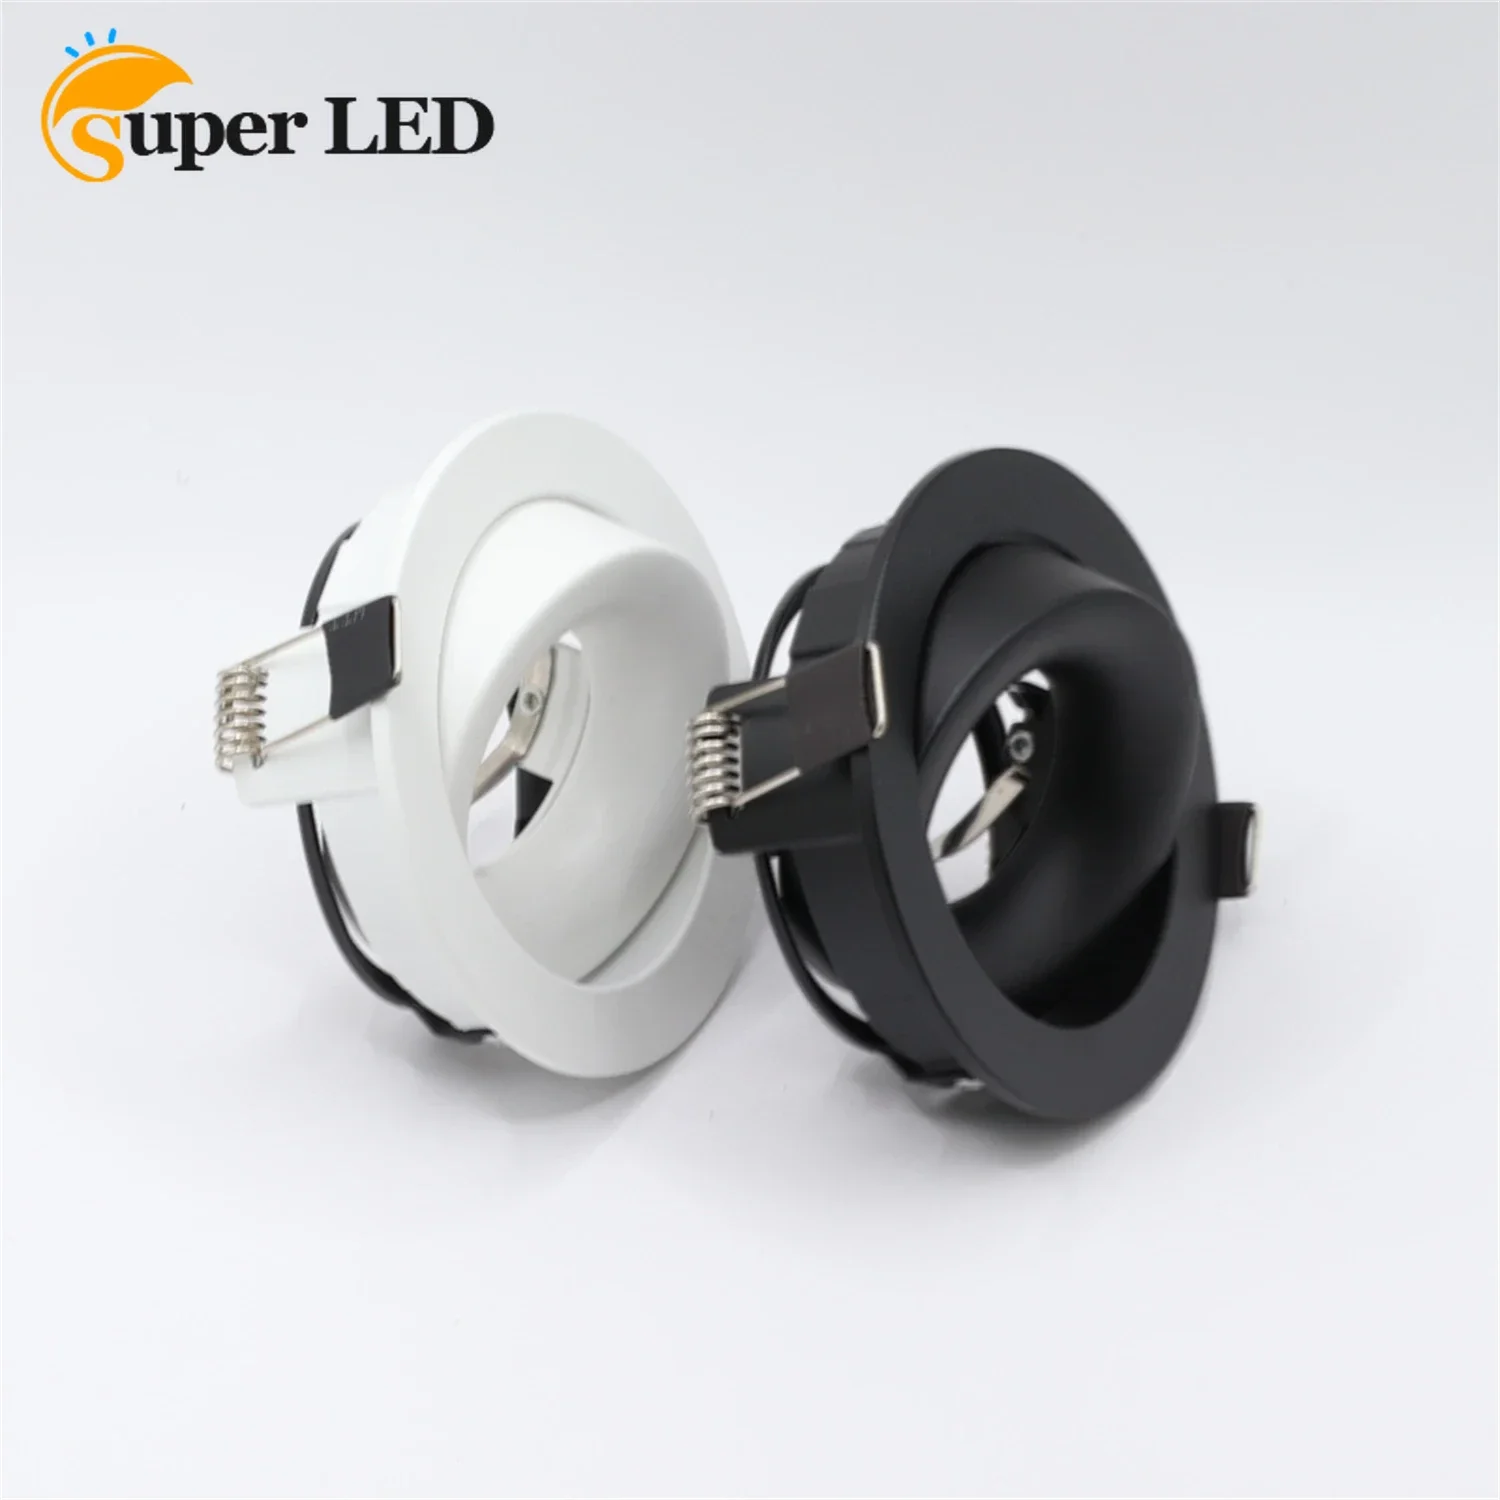 

Round Recessed Ceiling Downlight Mounting Zinc Alloy Frame MR16 GU10 Bulb Replaceable Lamp Holder Fitting Fixtures